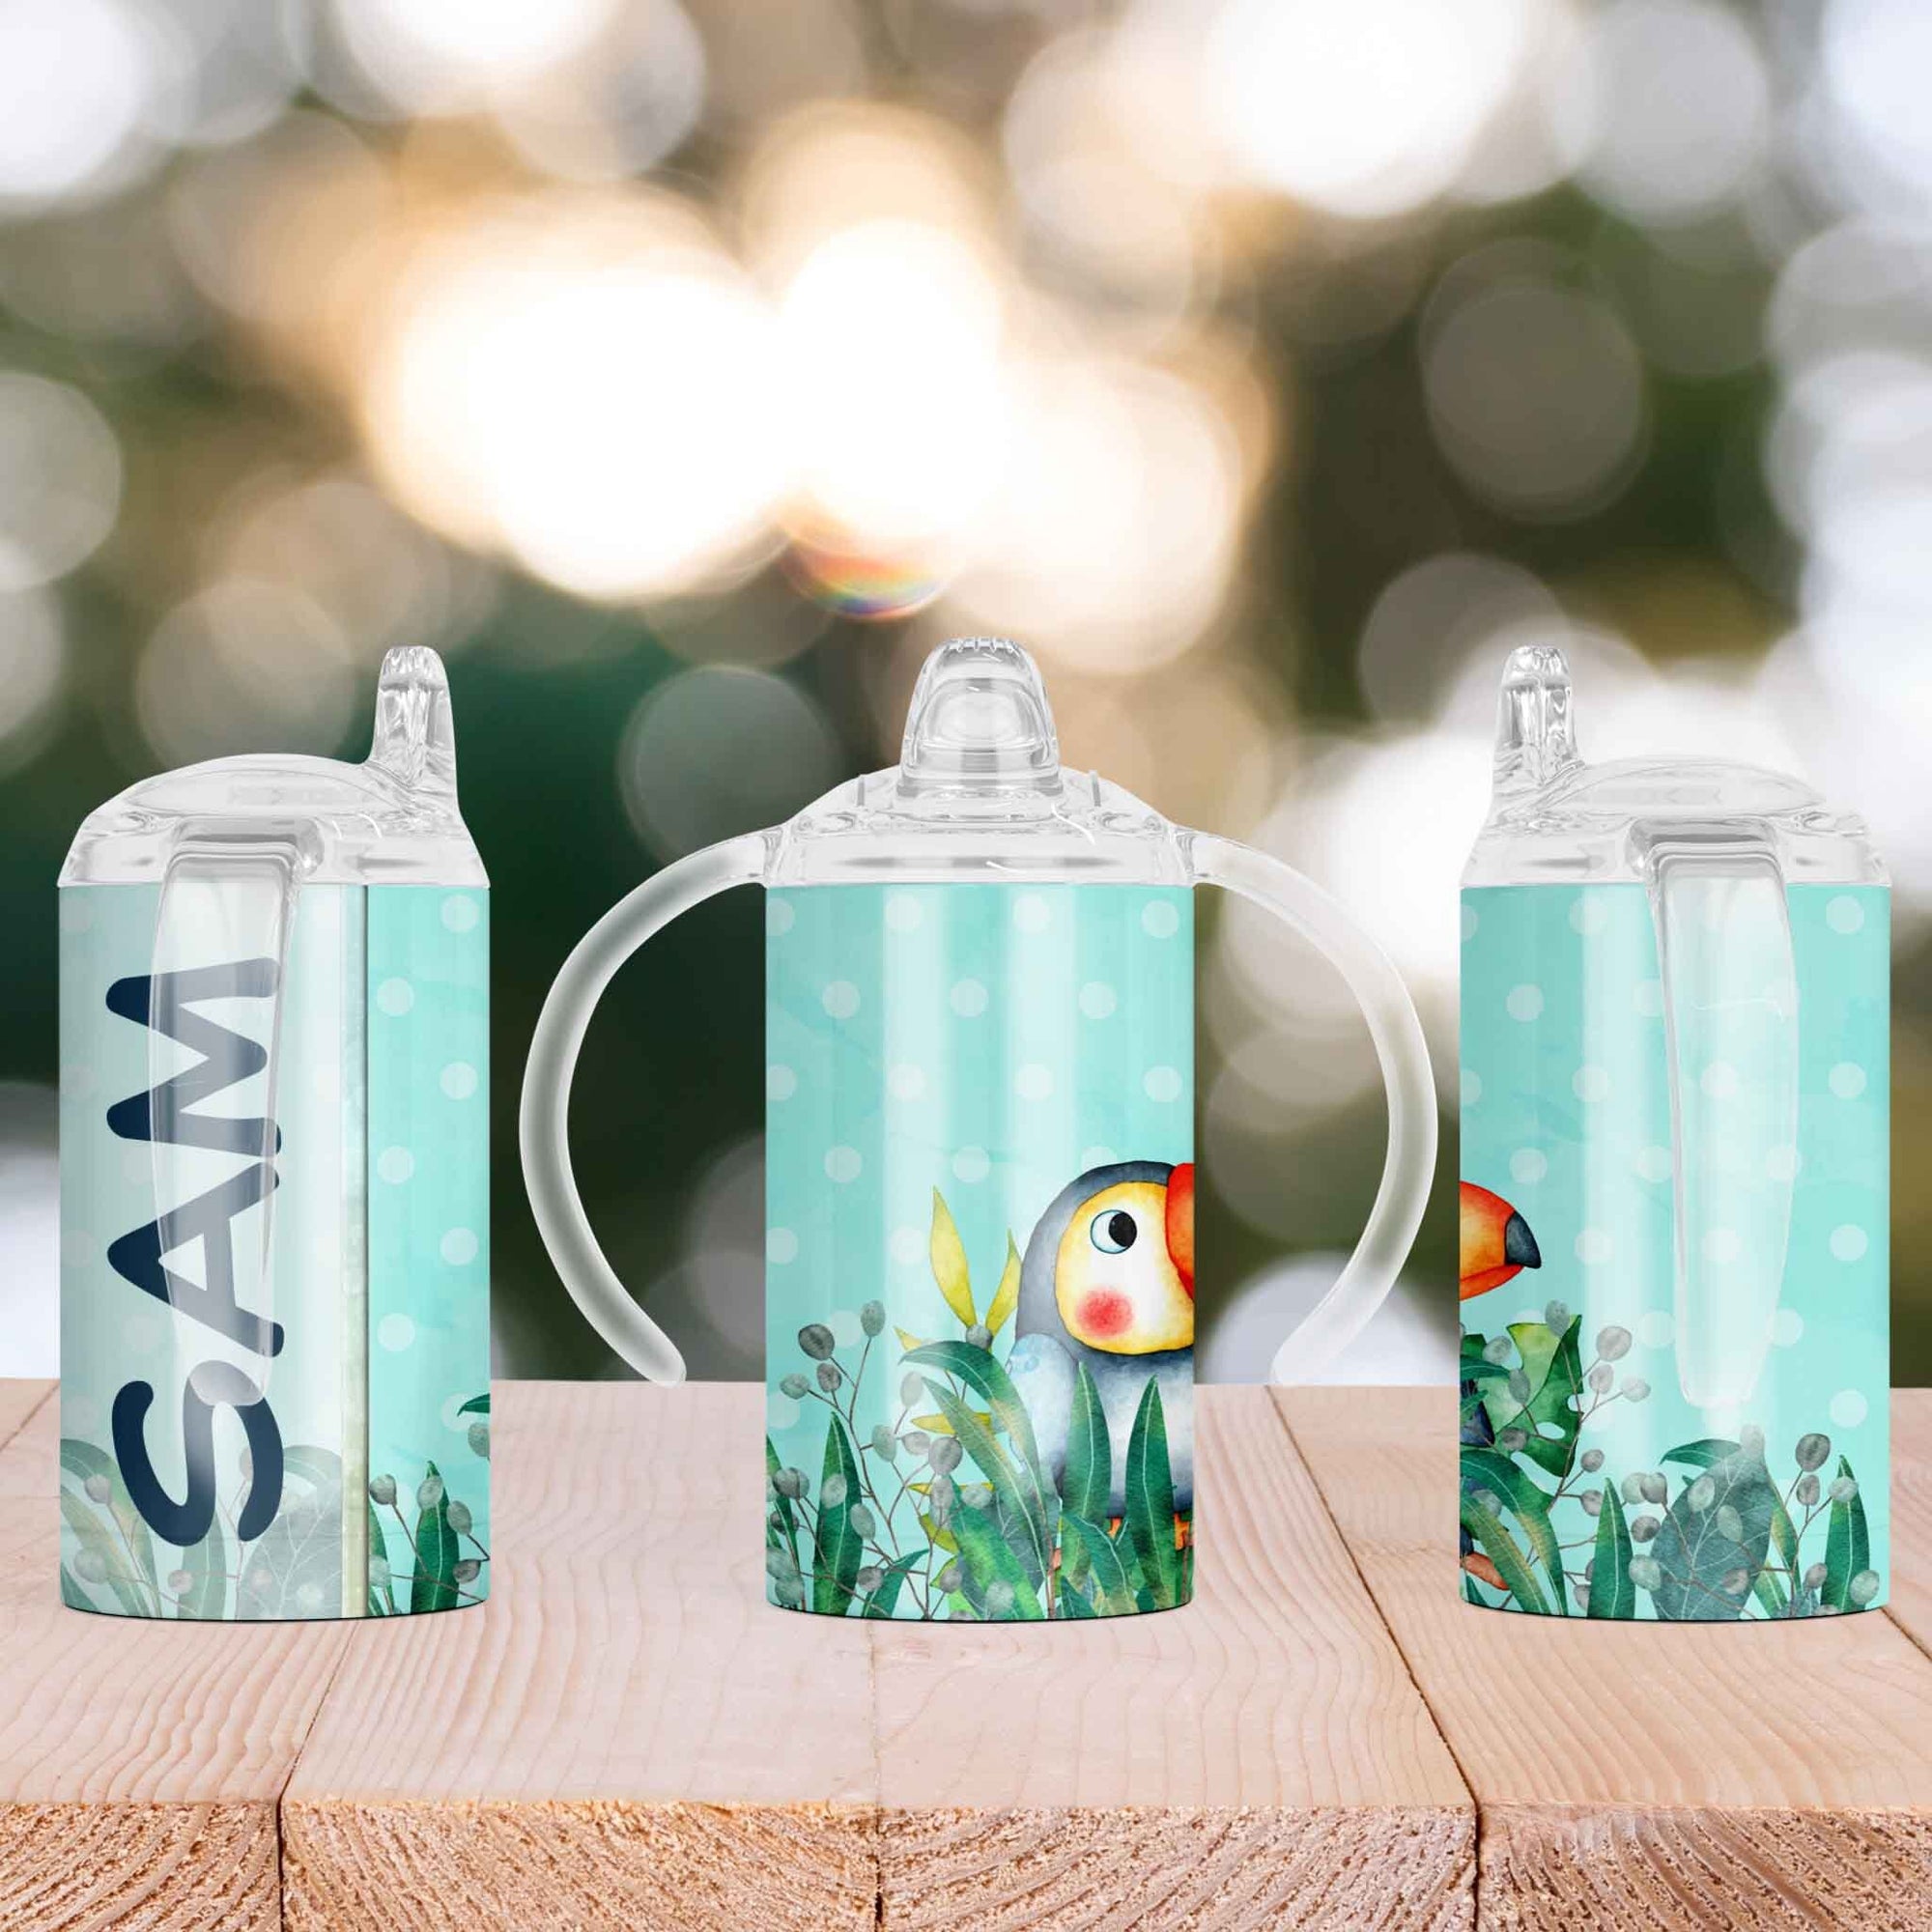 Custom Sippy Cup | Personalized Toddler Cup | Baby Gifts | Cute Toucan